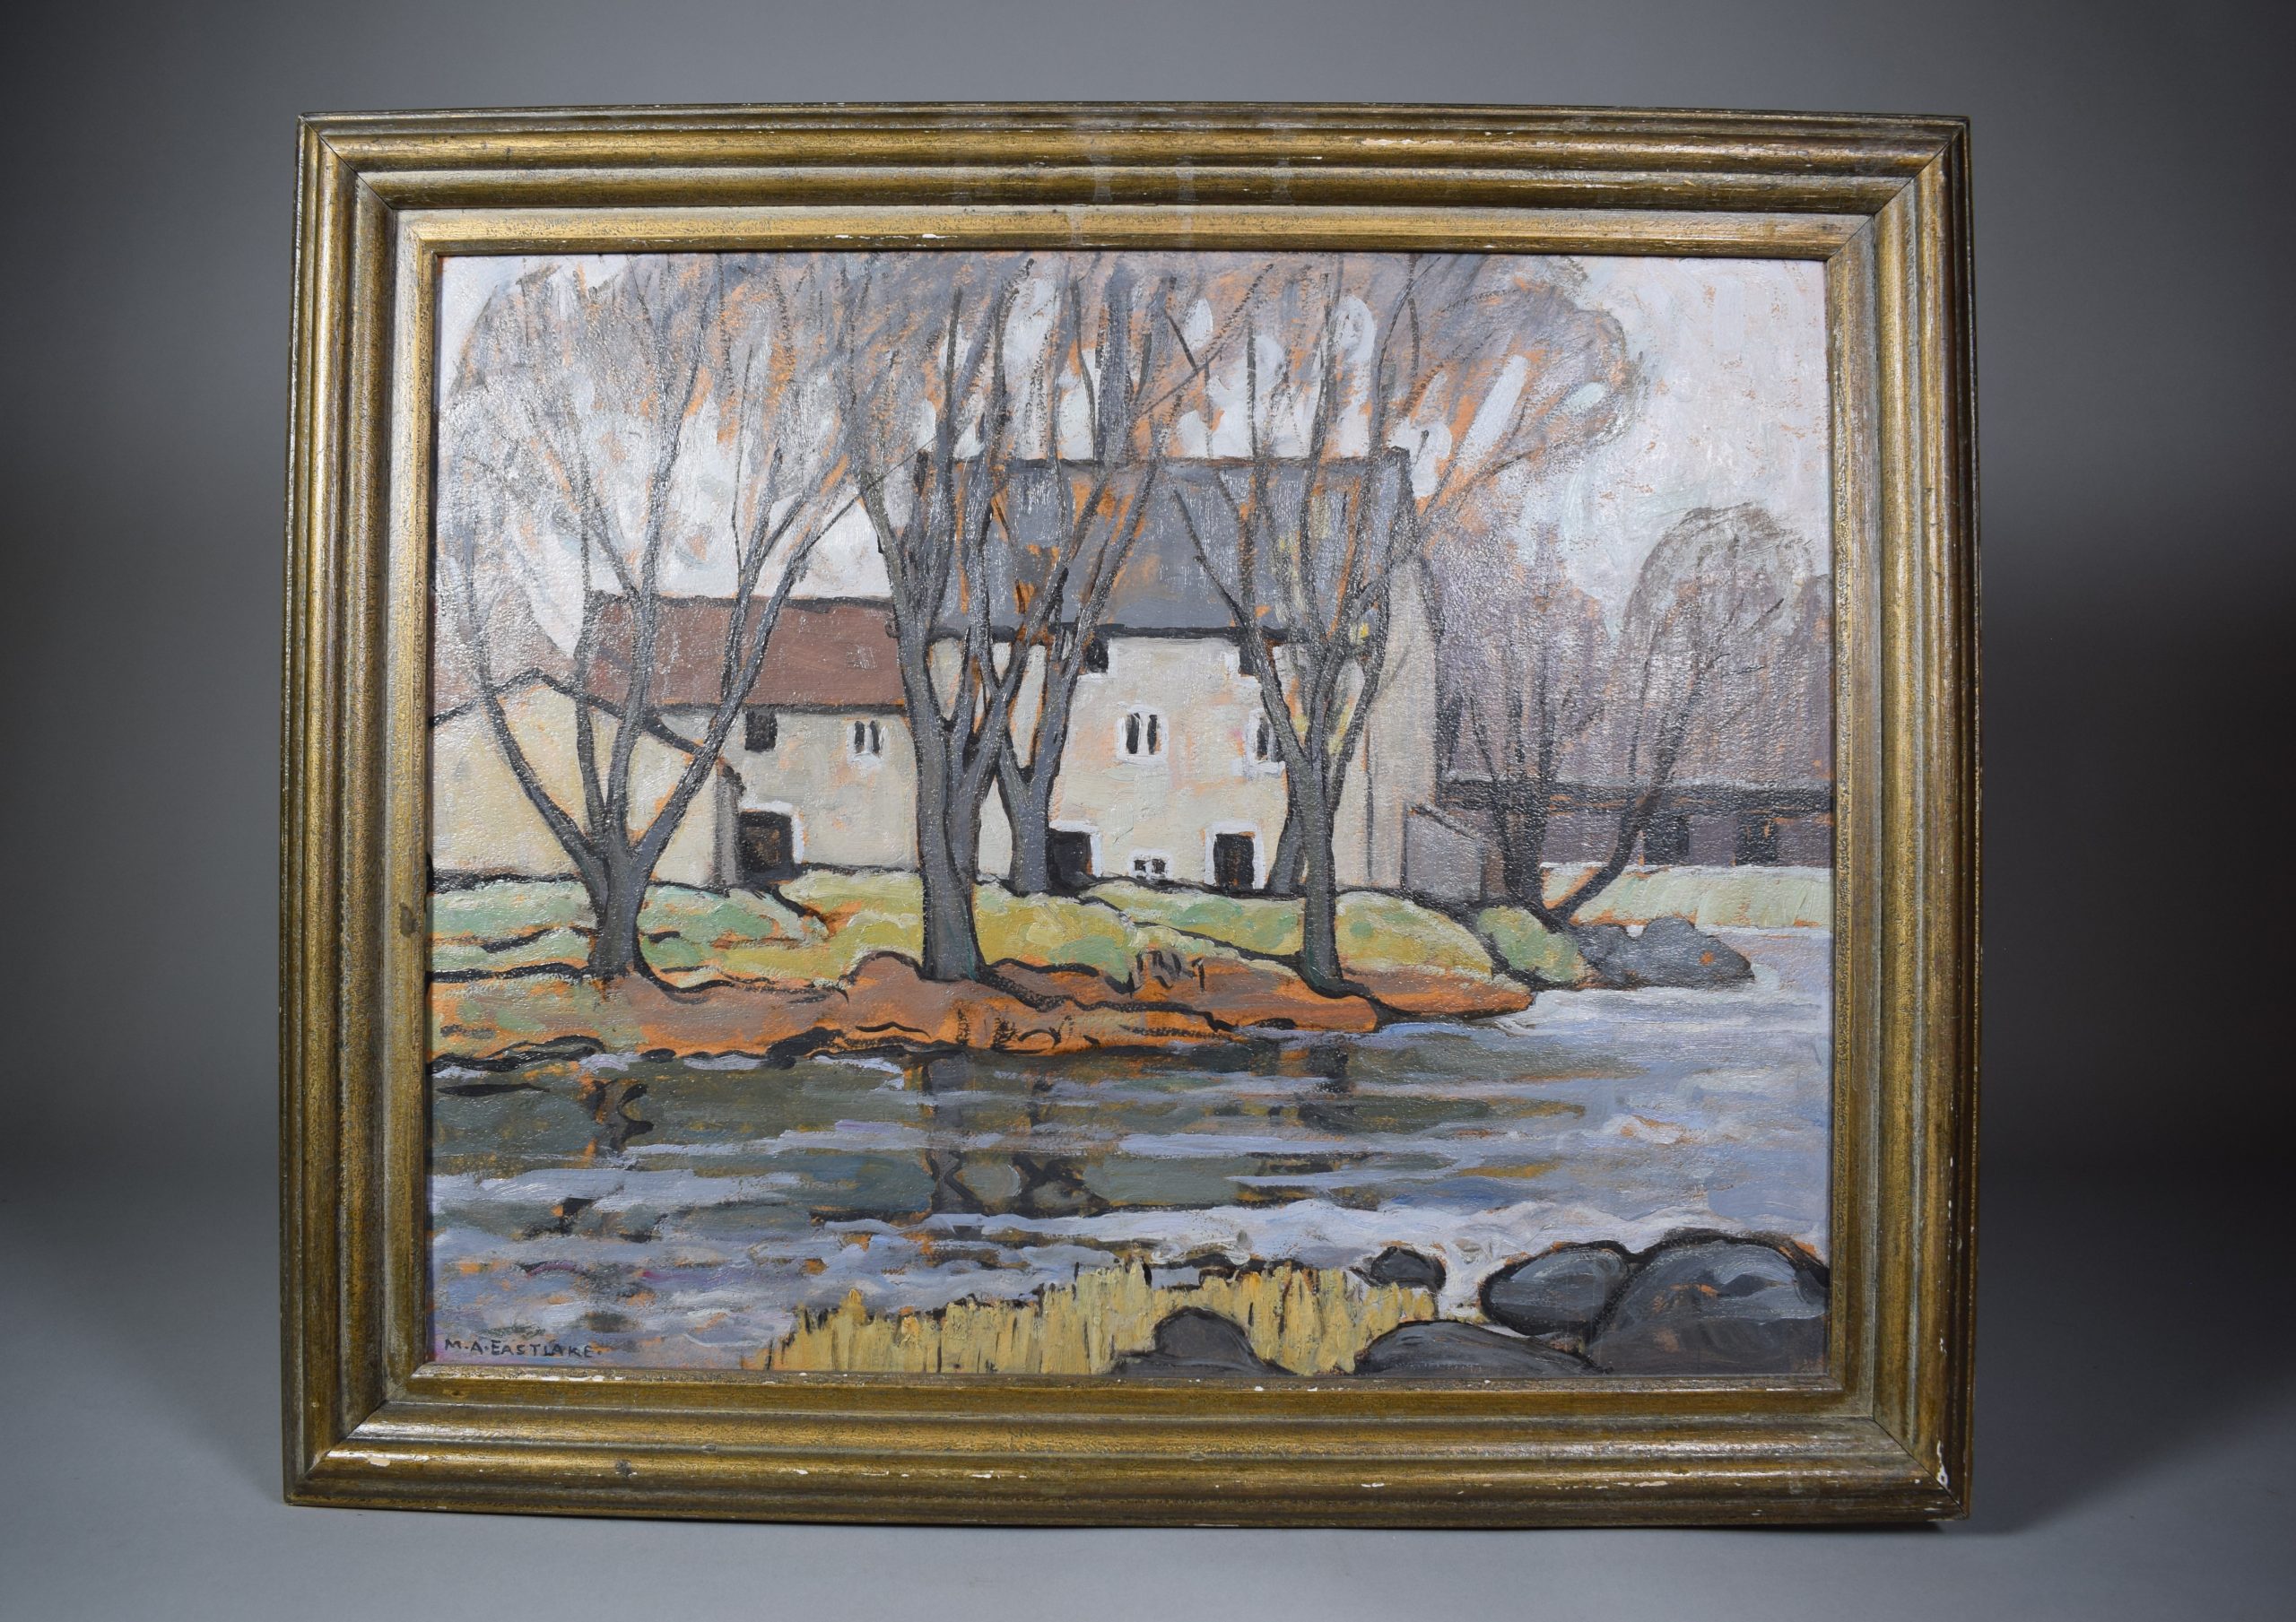 Colour oil painting of a mill on the banks of a river in the fall. It shows the river, trees and the mill. A low gabled building is seen from the back, next to which is the mill in two sections. The first section, on the left, has two floors of grey stone and a rusty gabled roof. The second section, on the right and attached to the first, has three floors and a dark grey gable roof. Behind the mill is a waterfall, a black railway bridge and more trees.